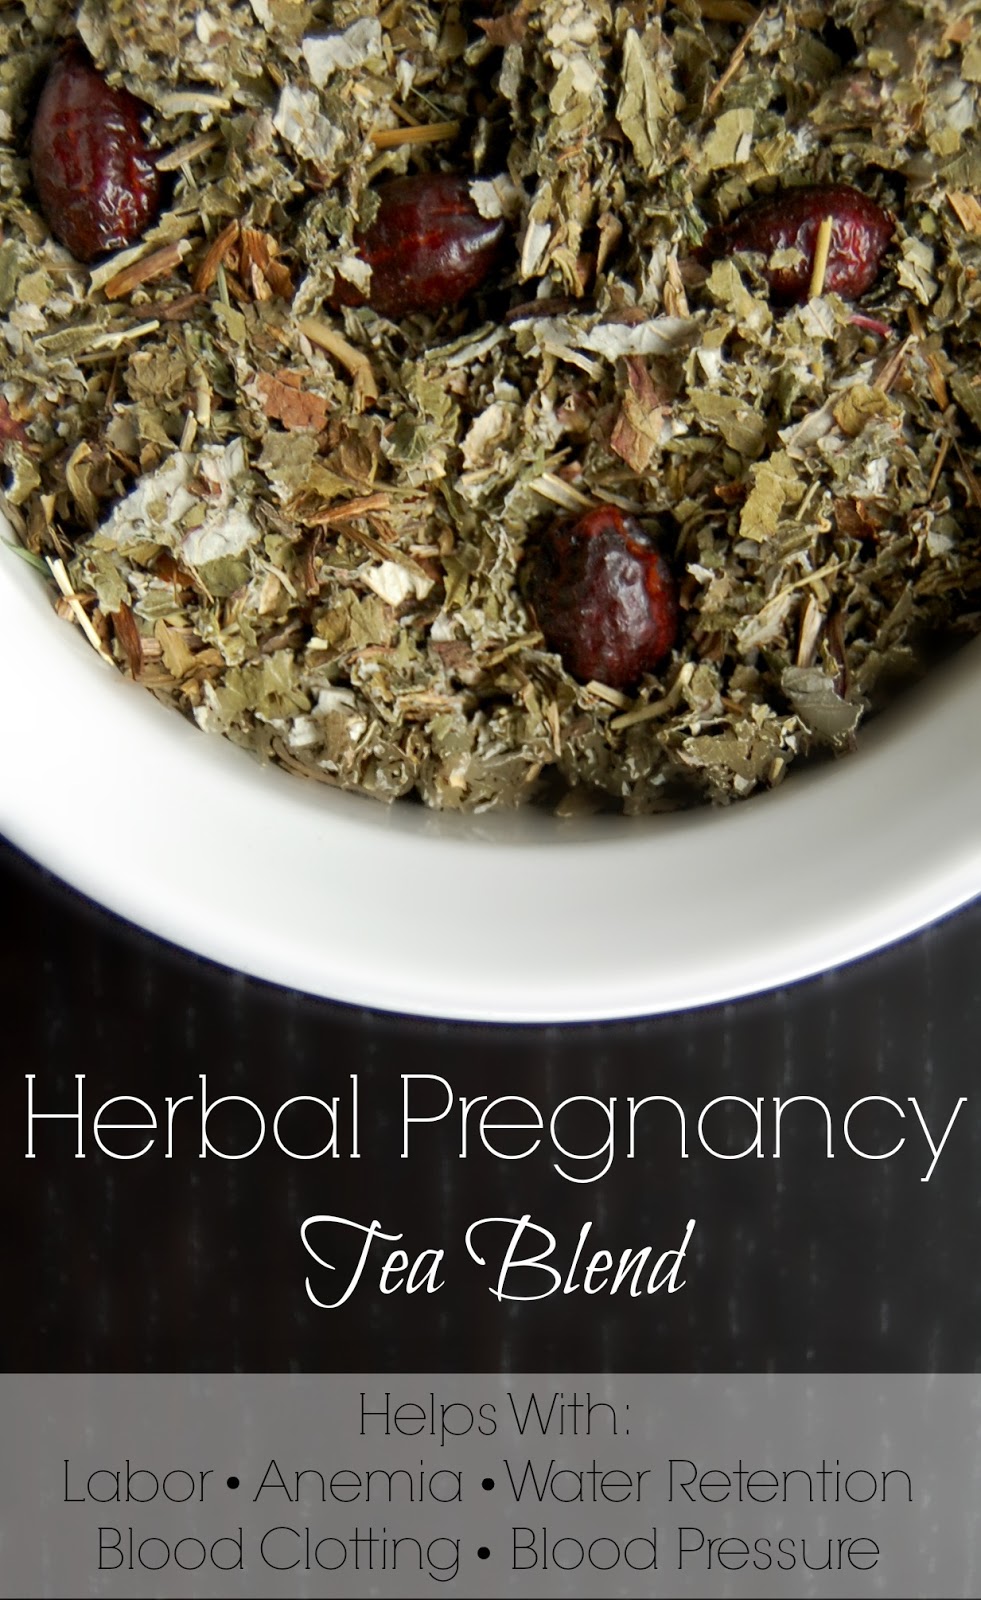 This Herbal Pregnancy Tea Blend is just the thing for any pregnant mama! It helps with water retention, anemia, and can even shorten labor! #naturalpregnancy #tea #herbal #waterretension #naturalchildbirth